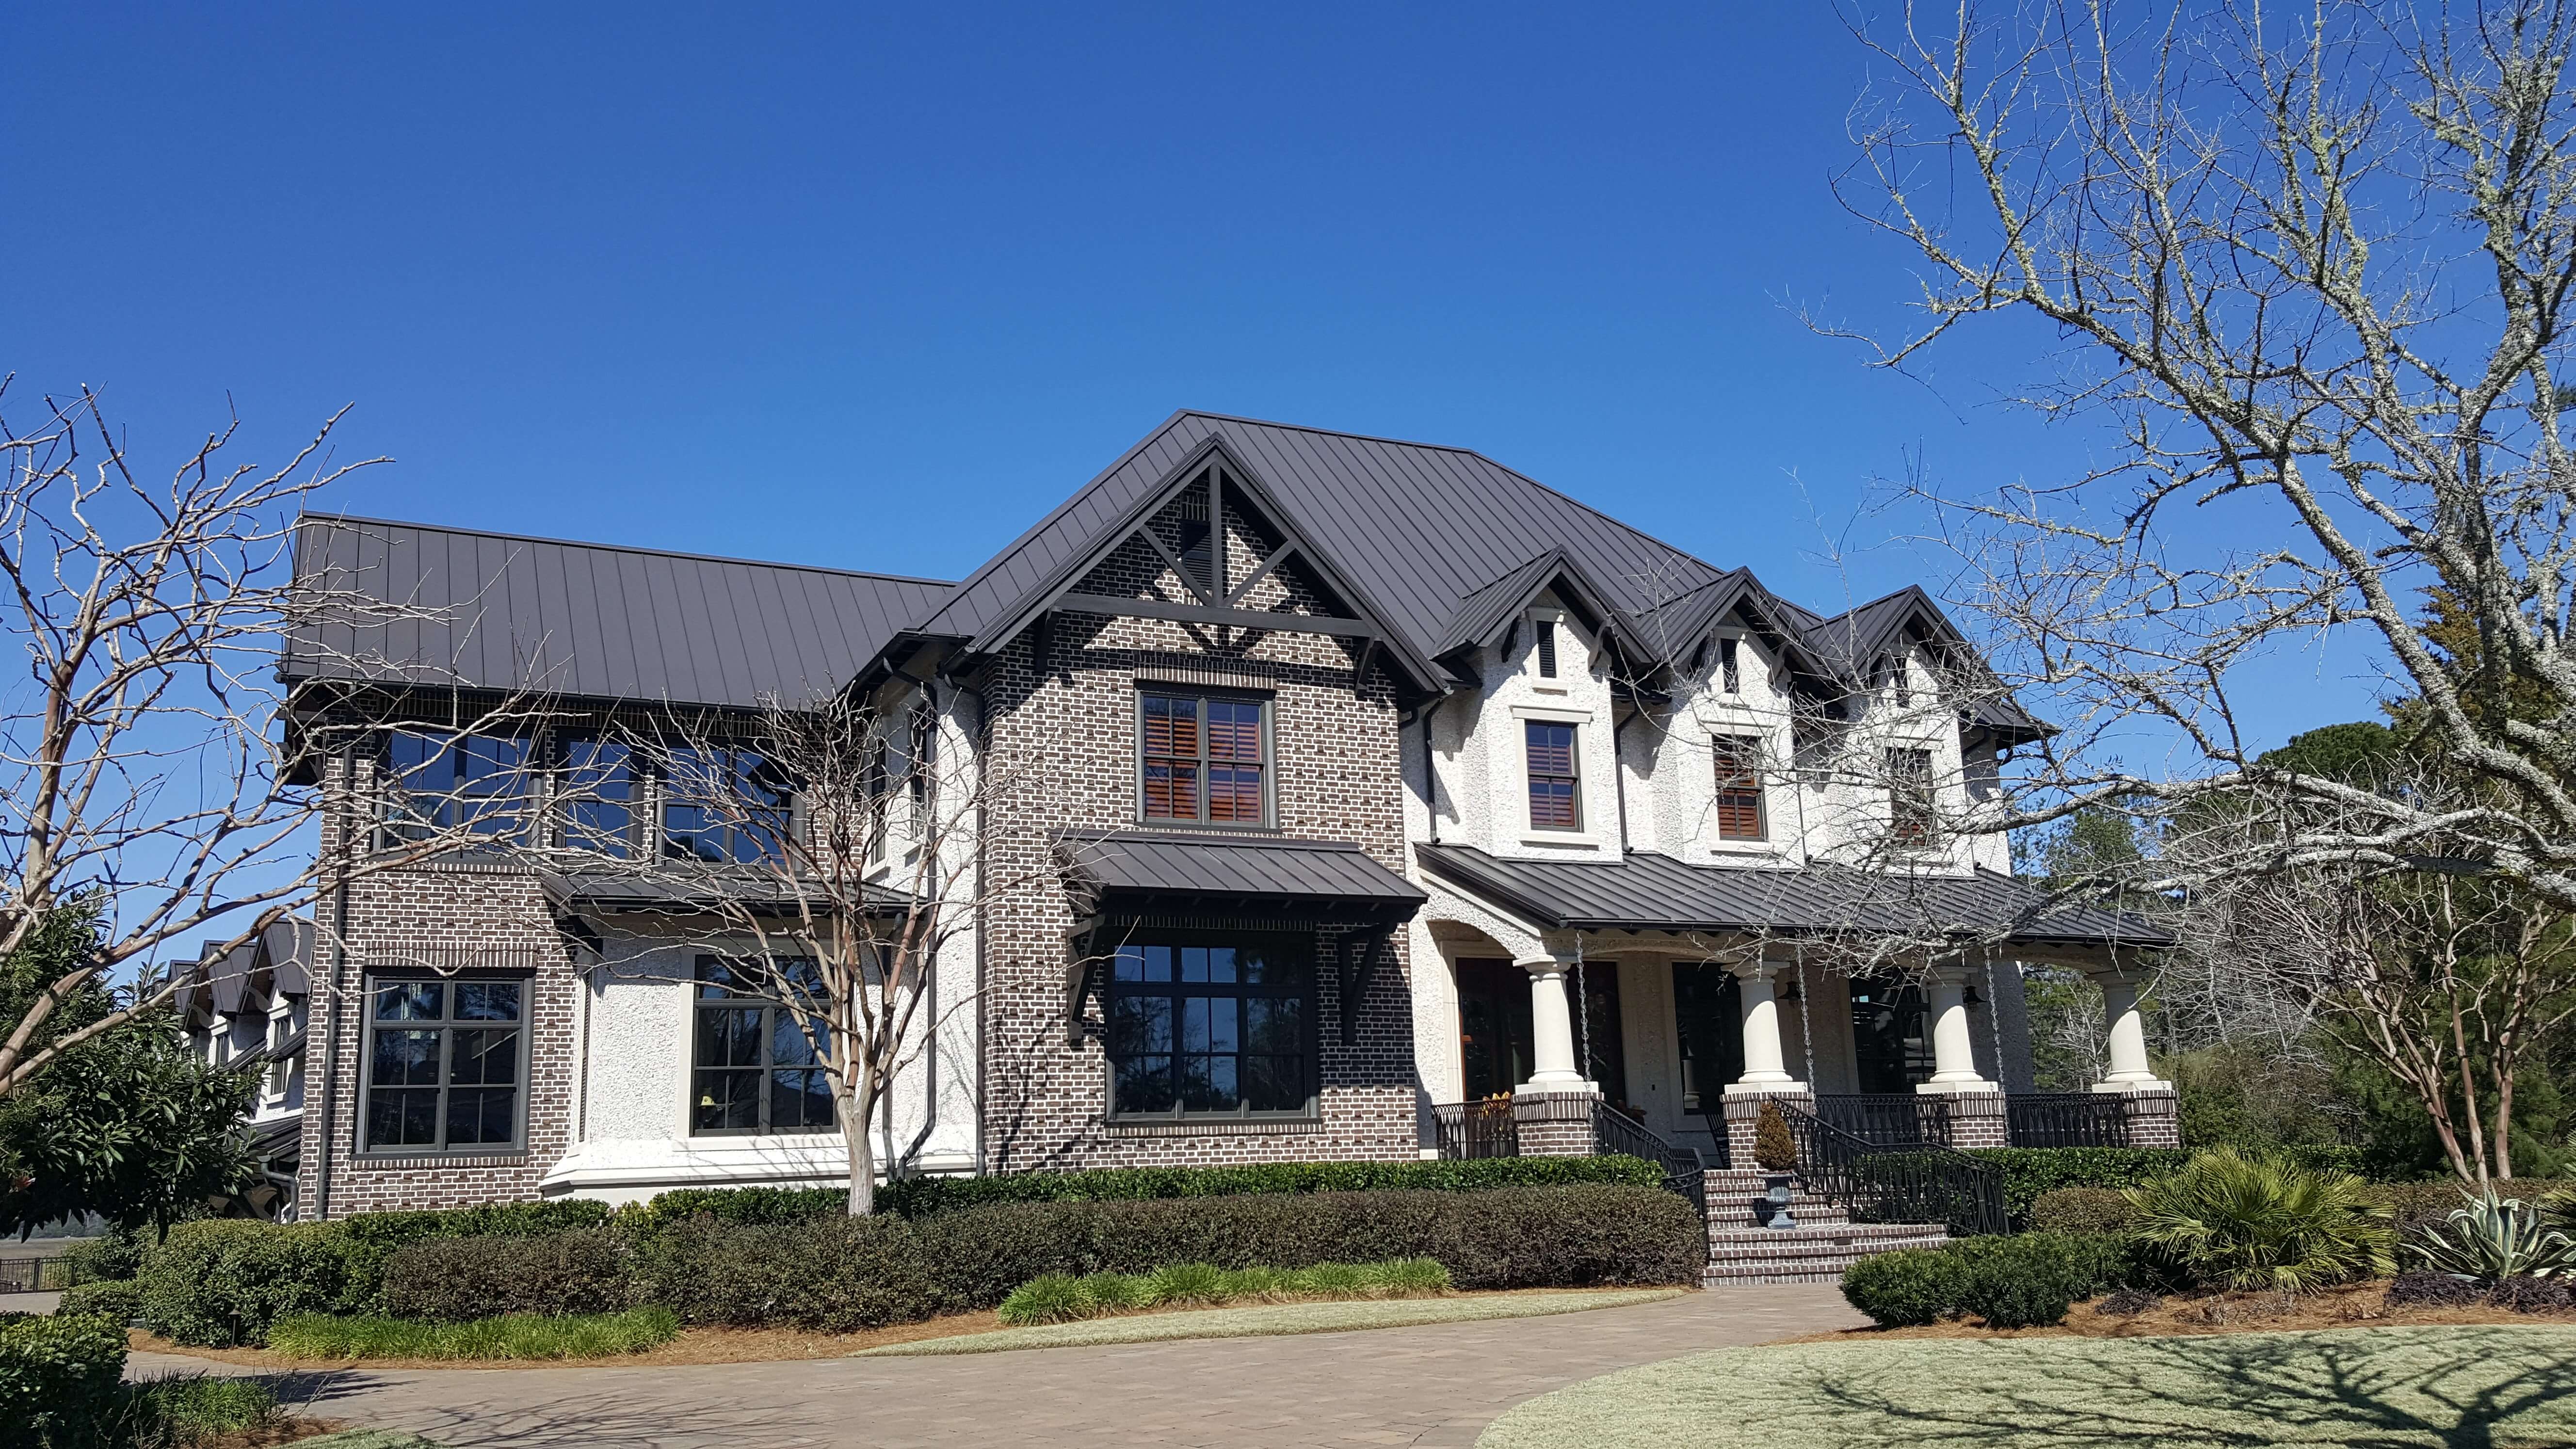 Large Tudor style home with bronze standing seam roof